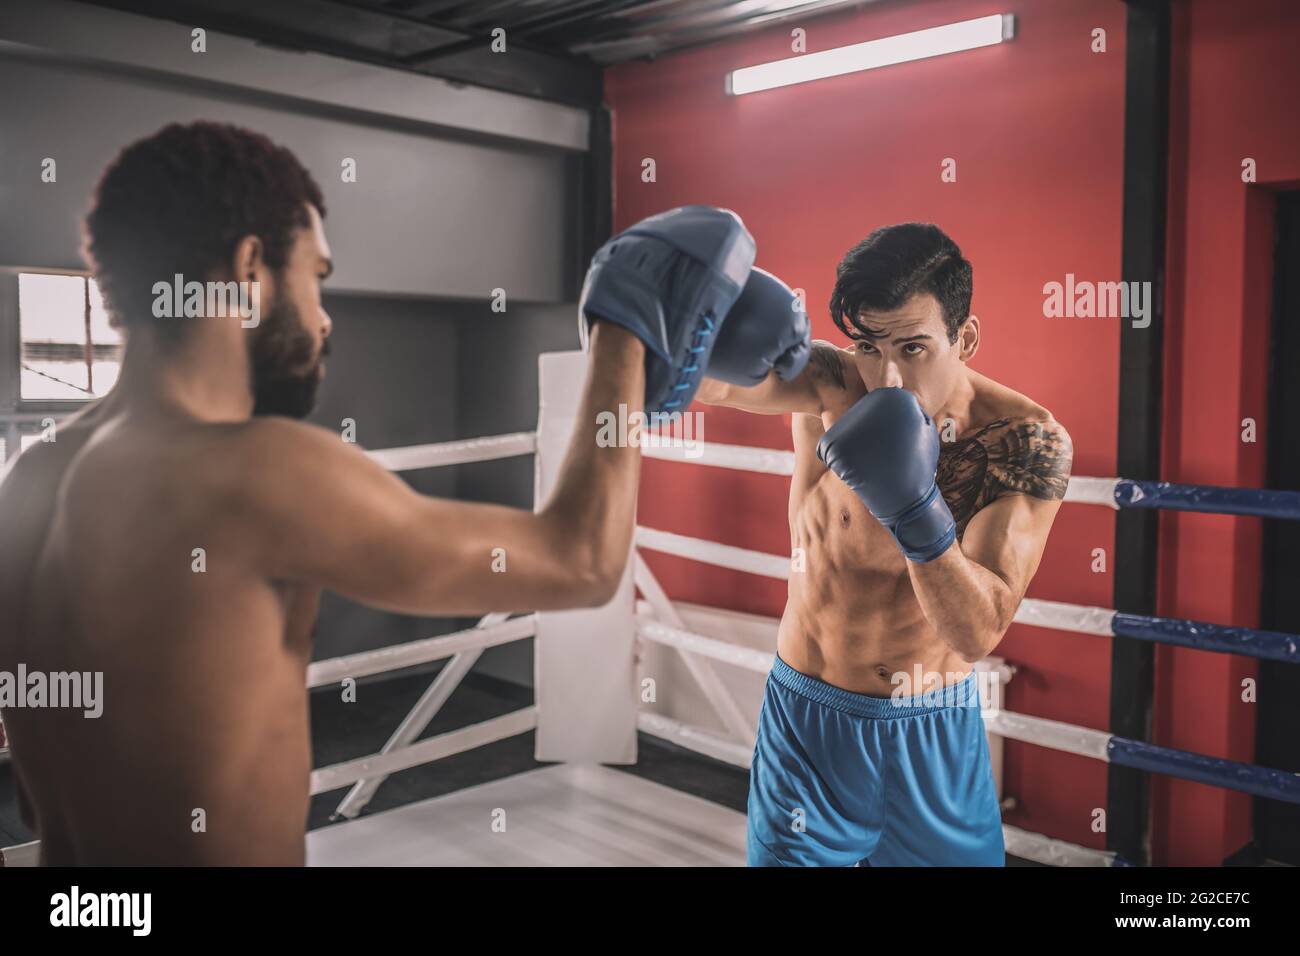 Young men fighting on a boxing ring and looking determined Stock Photo